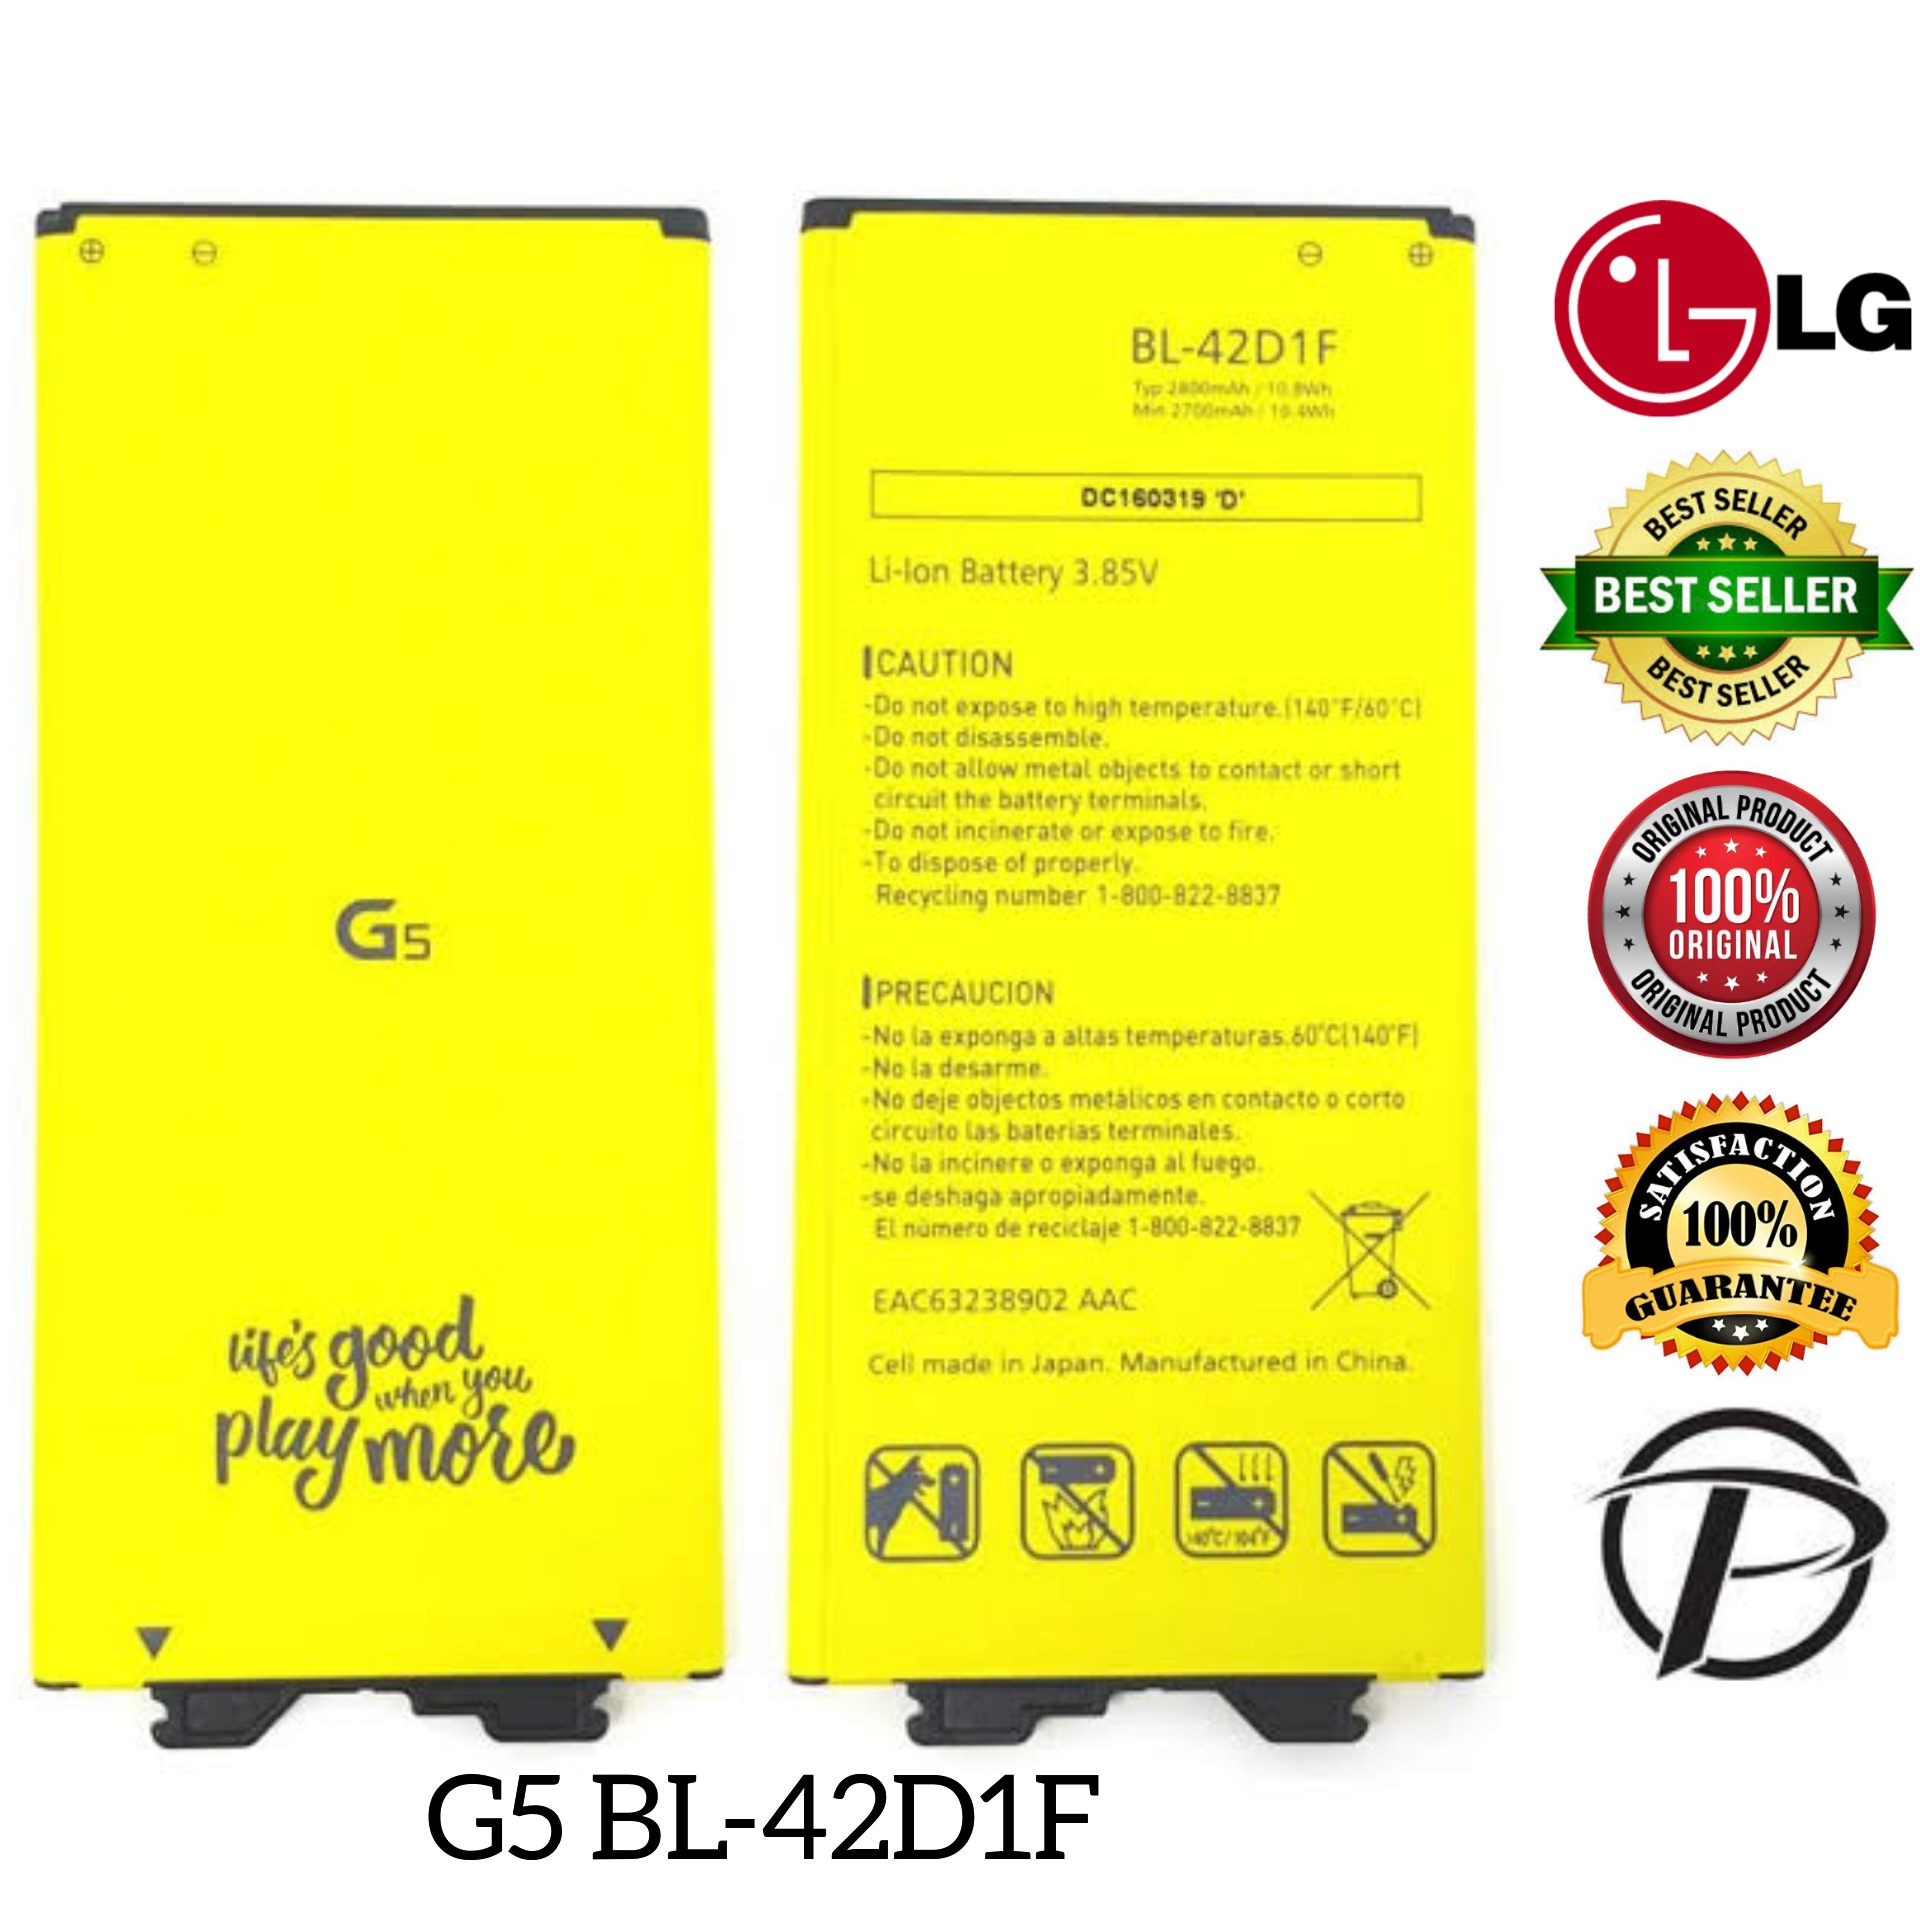 LG G5 Battery LCLEBM G5 Battery 3200mAh Replacement Battery for LG G5 BL-42D1F US992 VS987 LS992 H820 H830 H845 Dual H850 H858 G5 Battery Replacement Upgraded 